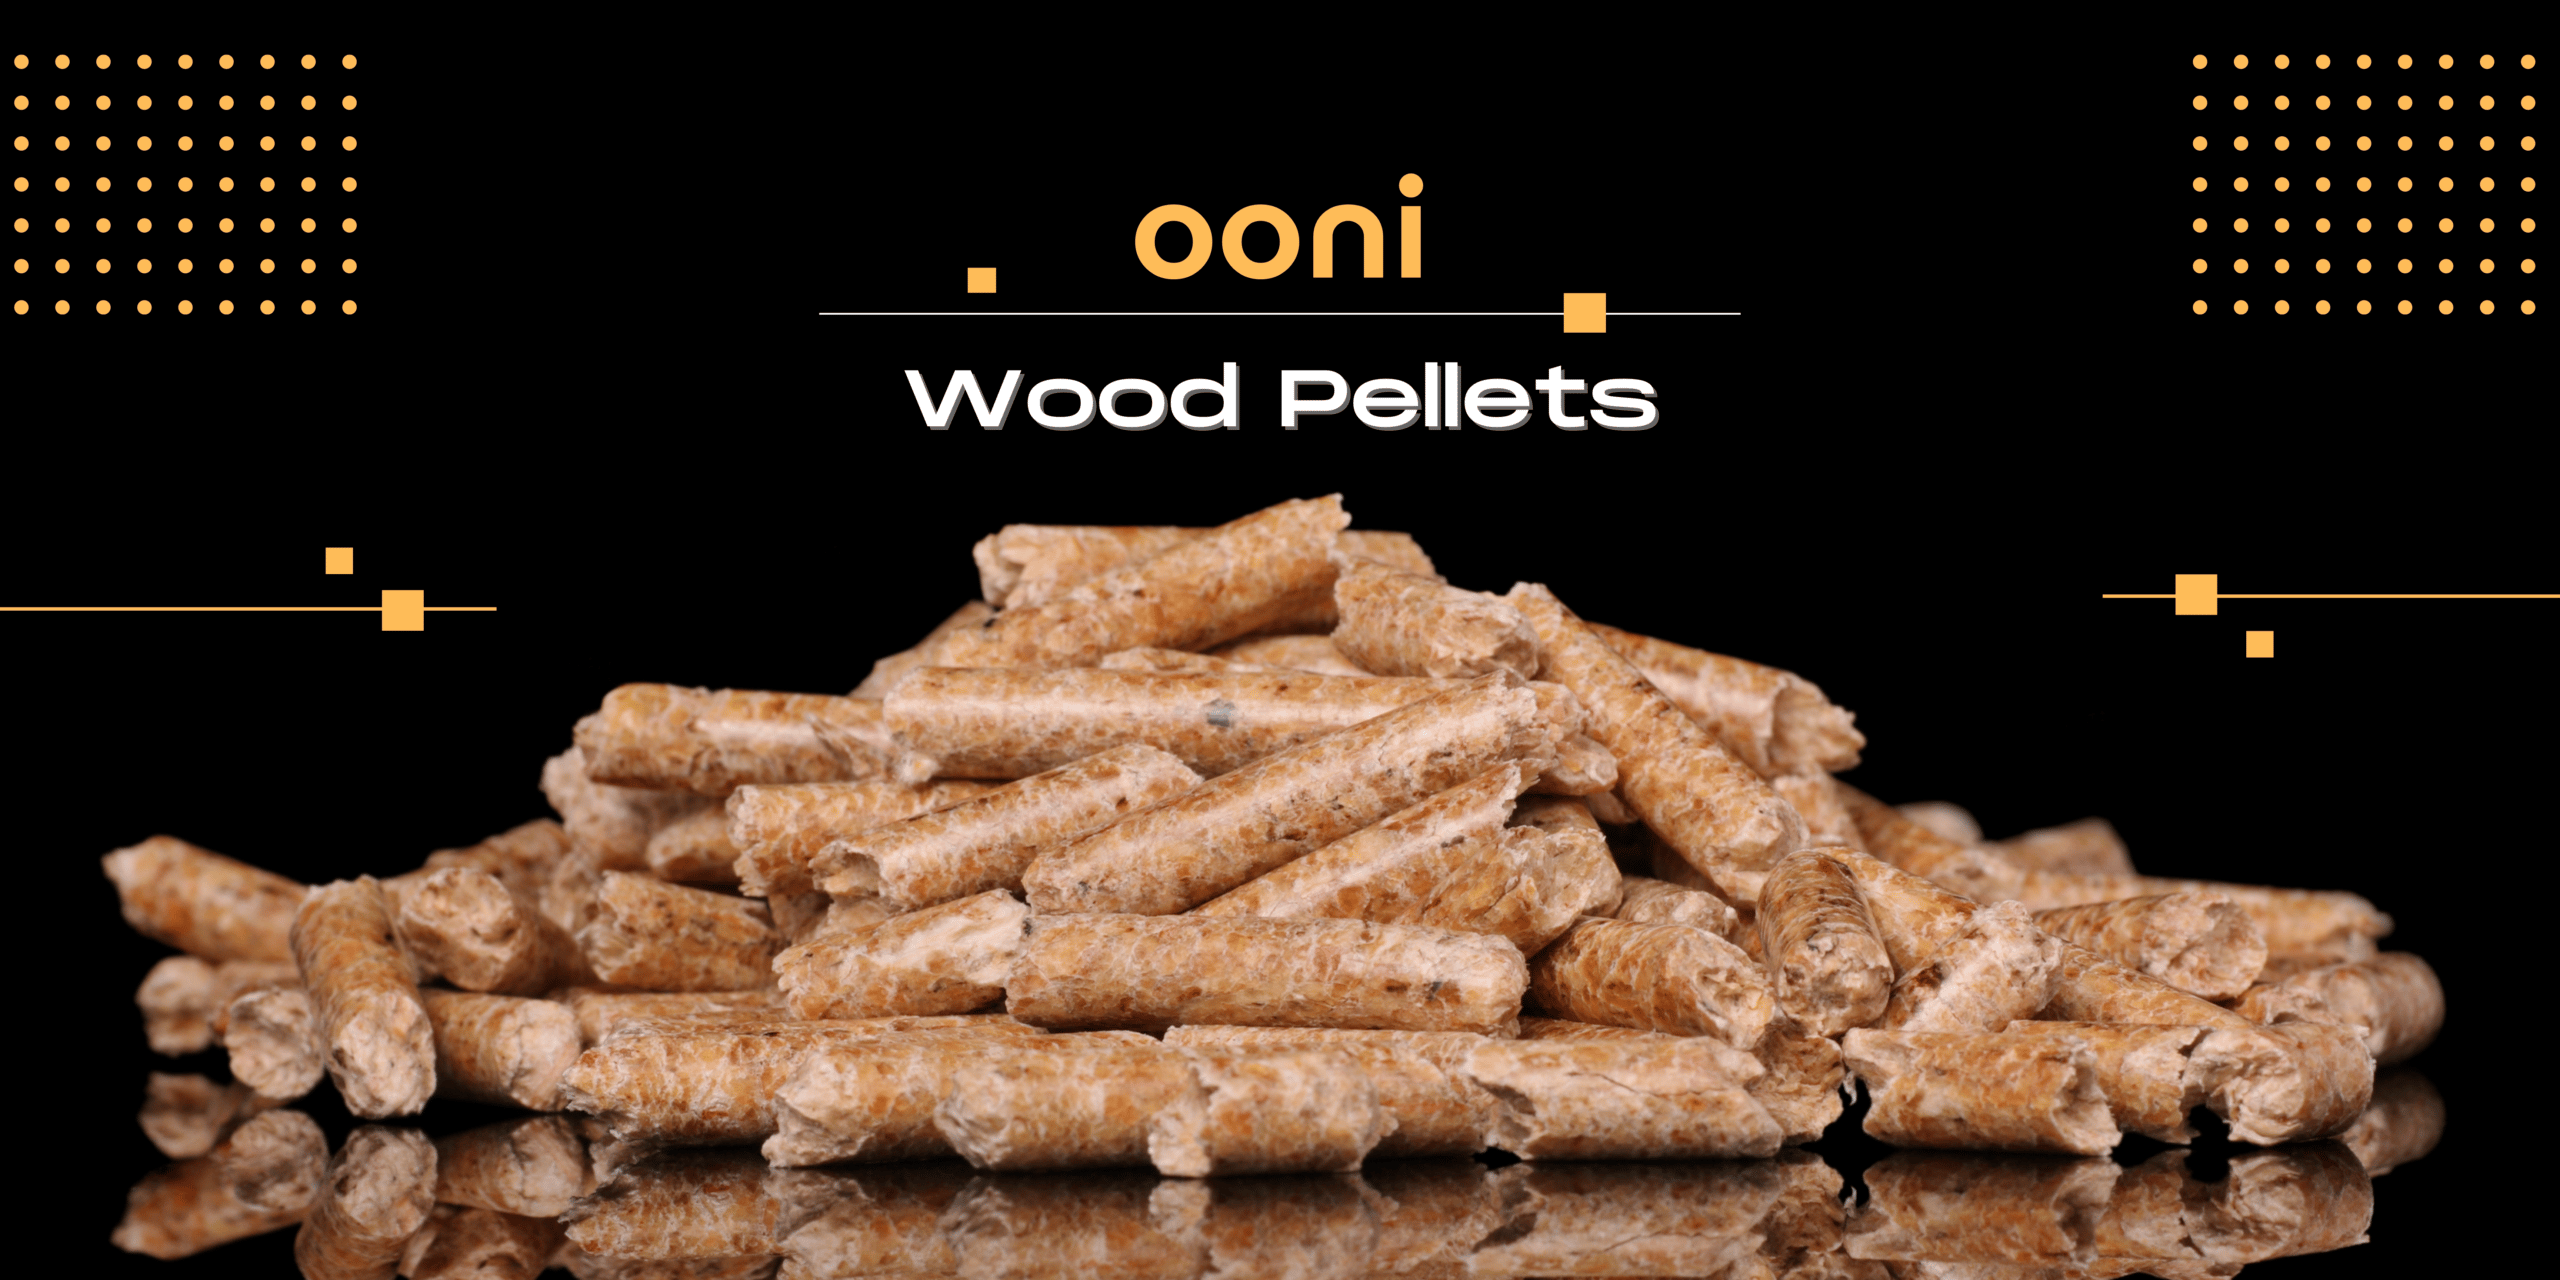 Ooni Pellets: Top Choice for Your Ooni Pizza Oven [Here’s Why]